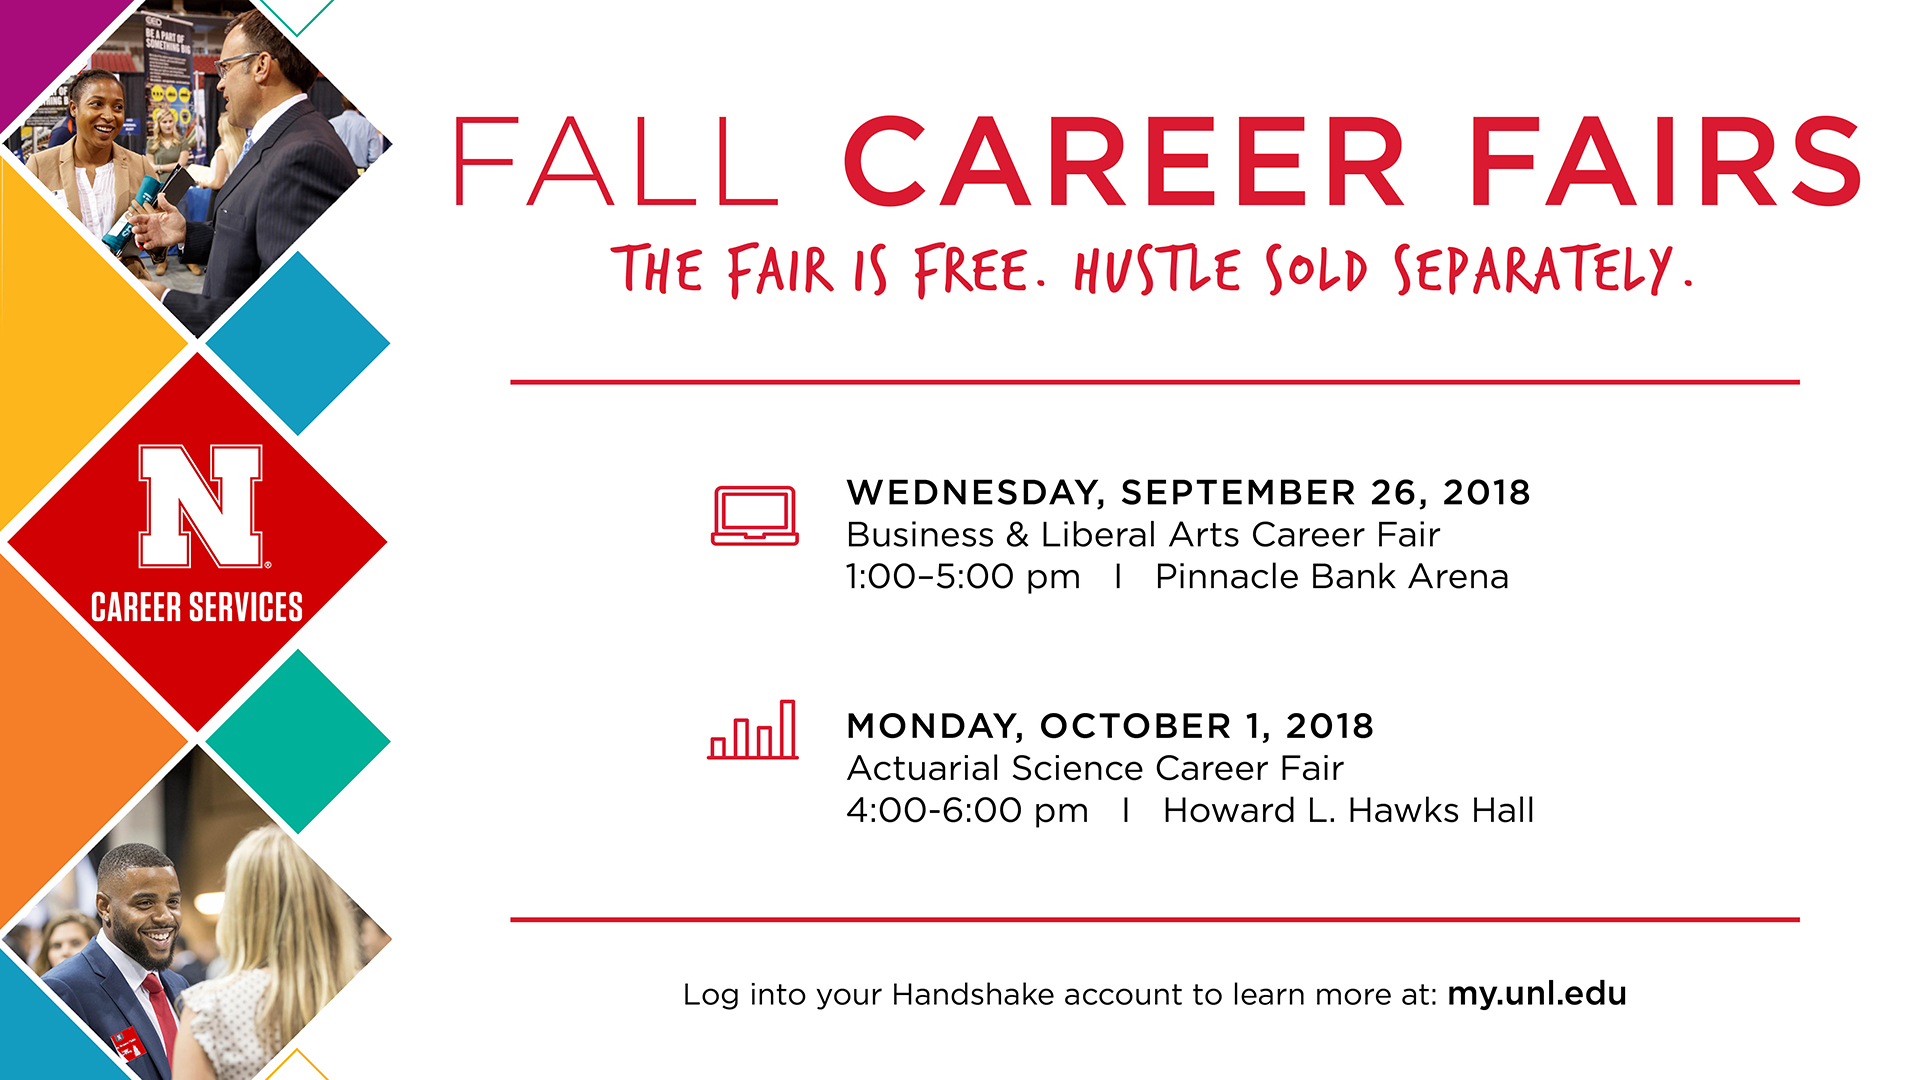 Don't miss the Fall Career Fairs!